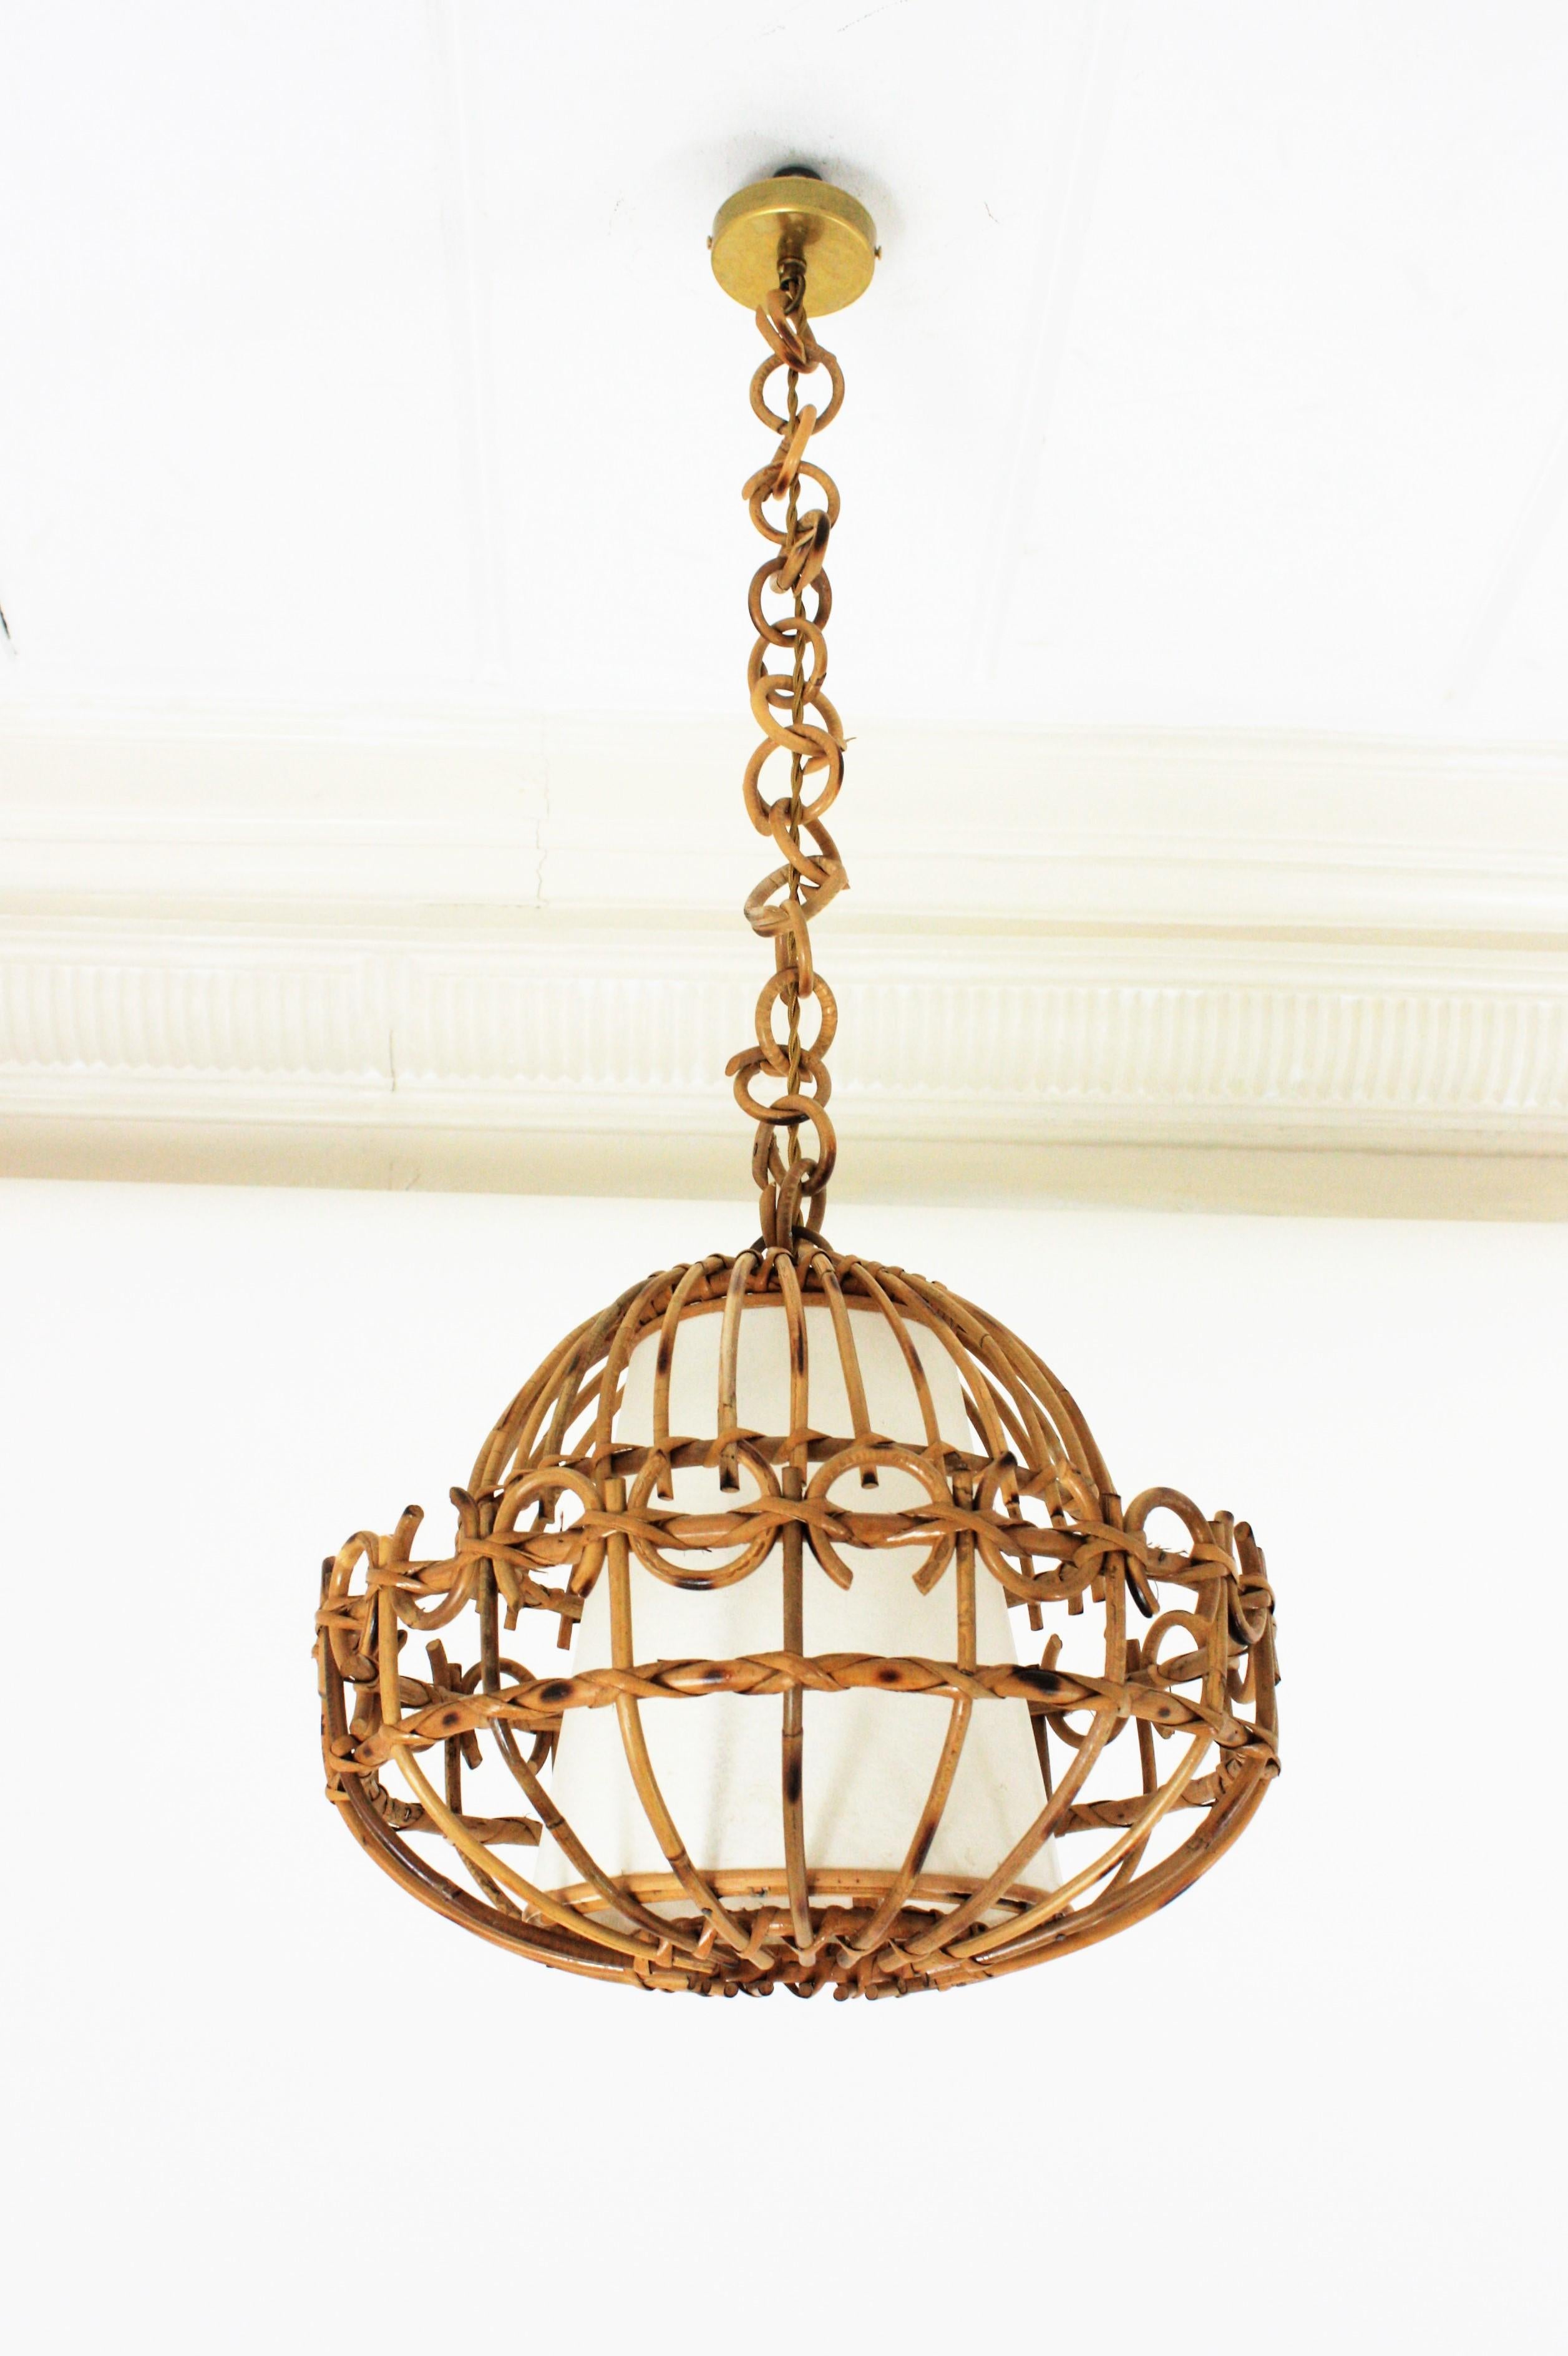 Eye-catching handcrafted rattan ceiling pendant hanging light, Spain, 1960s.
This lantern has an beautiful design featuring a semi-spherical rattan structure decorated by semi circle details.
It has a conical paper lampshade at the interior part